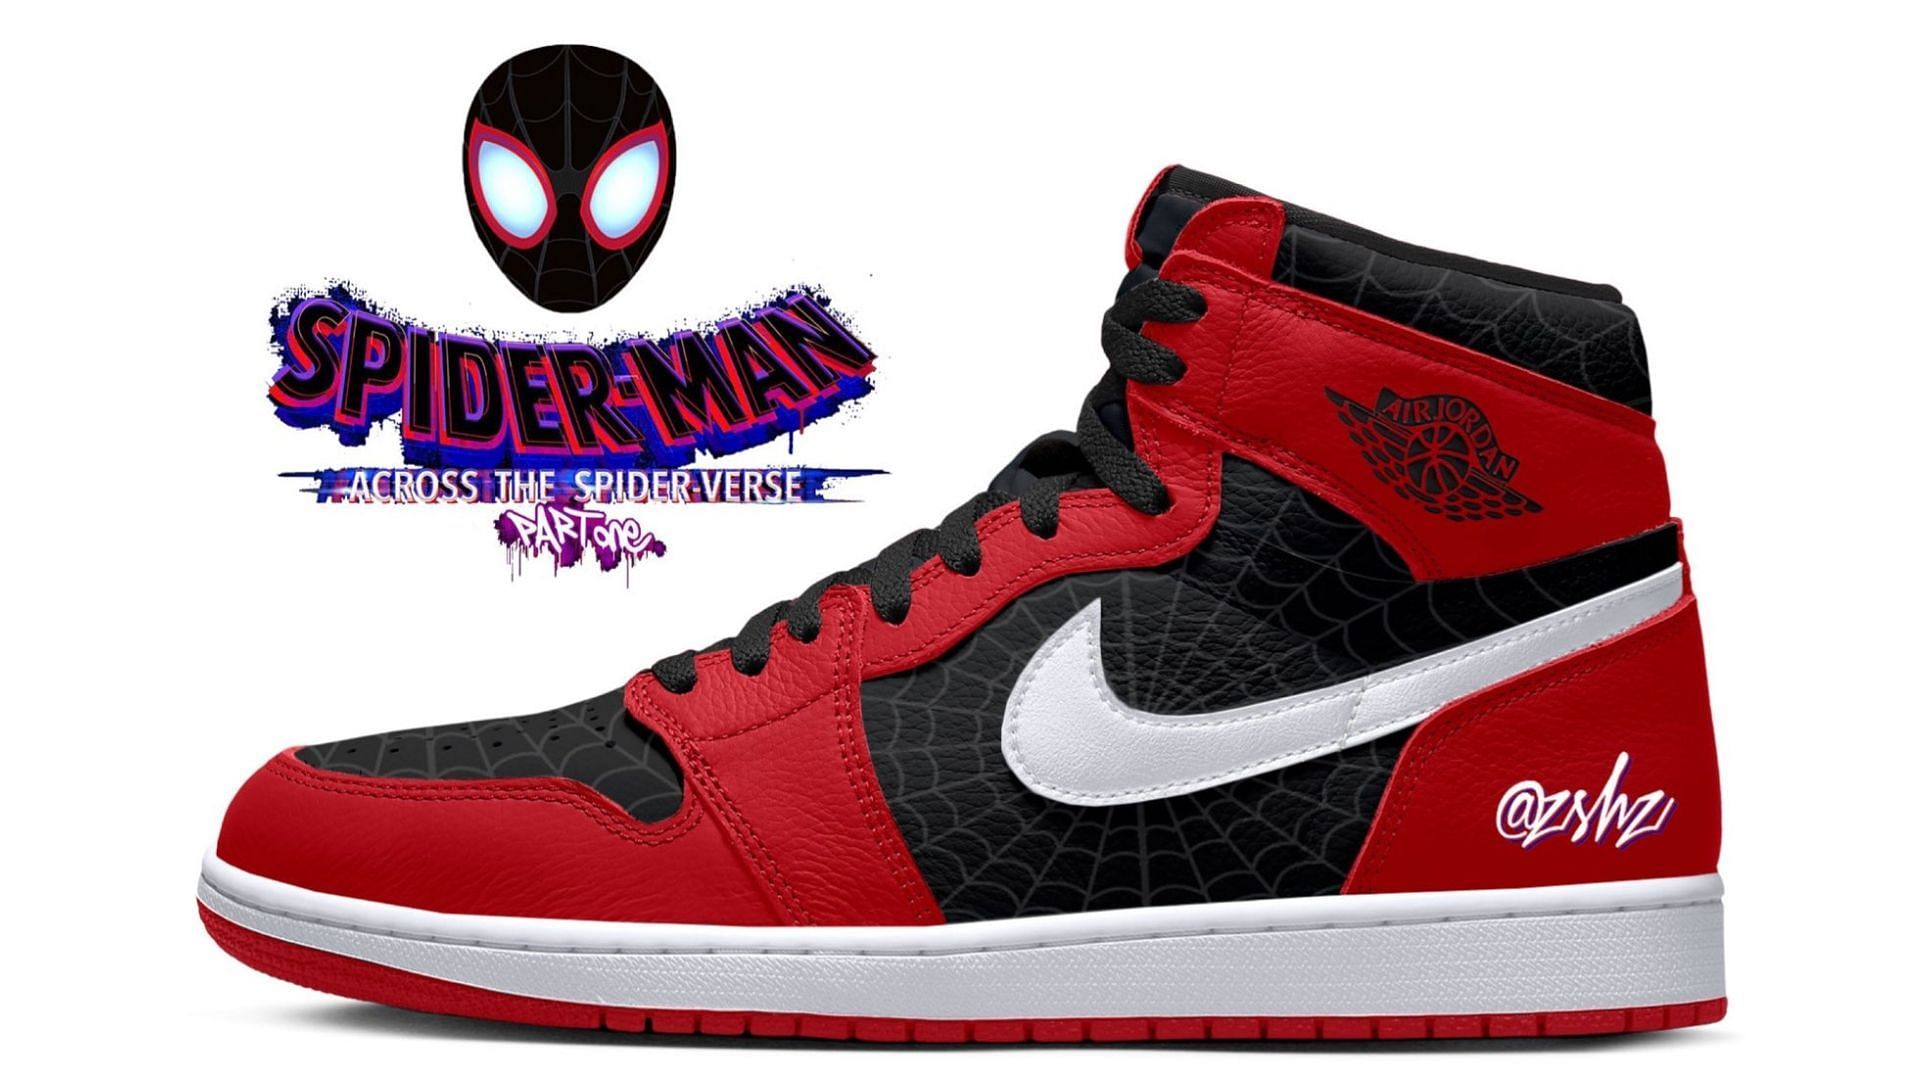 cobre Robar a Productos lácteos Where to buy Spider-Man: Across the Spider-Verse x Air Jordan 1 High OG  shoes? Price and more details explored